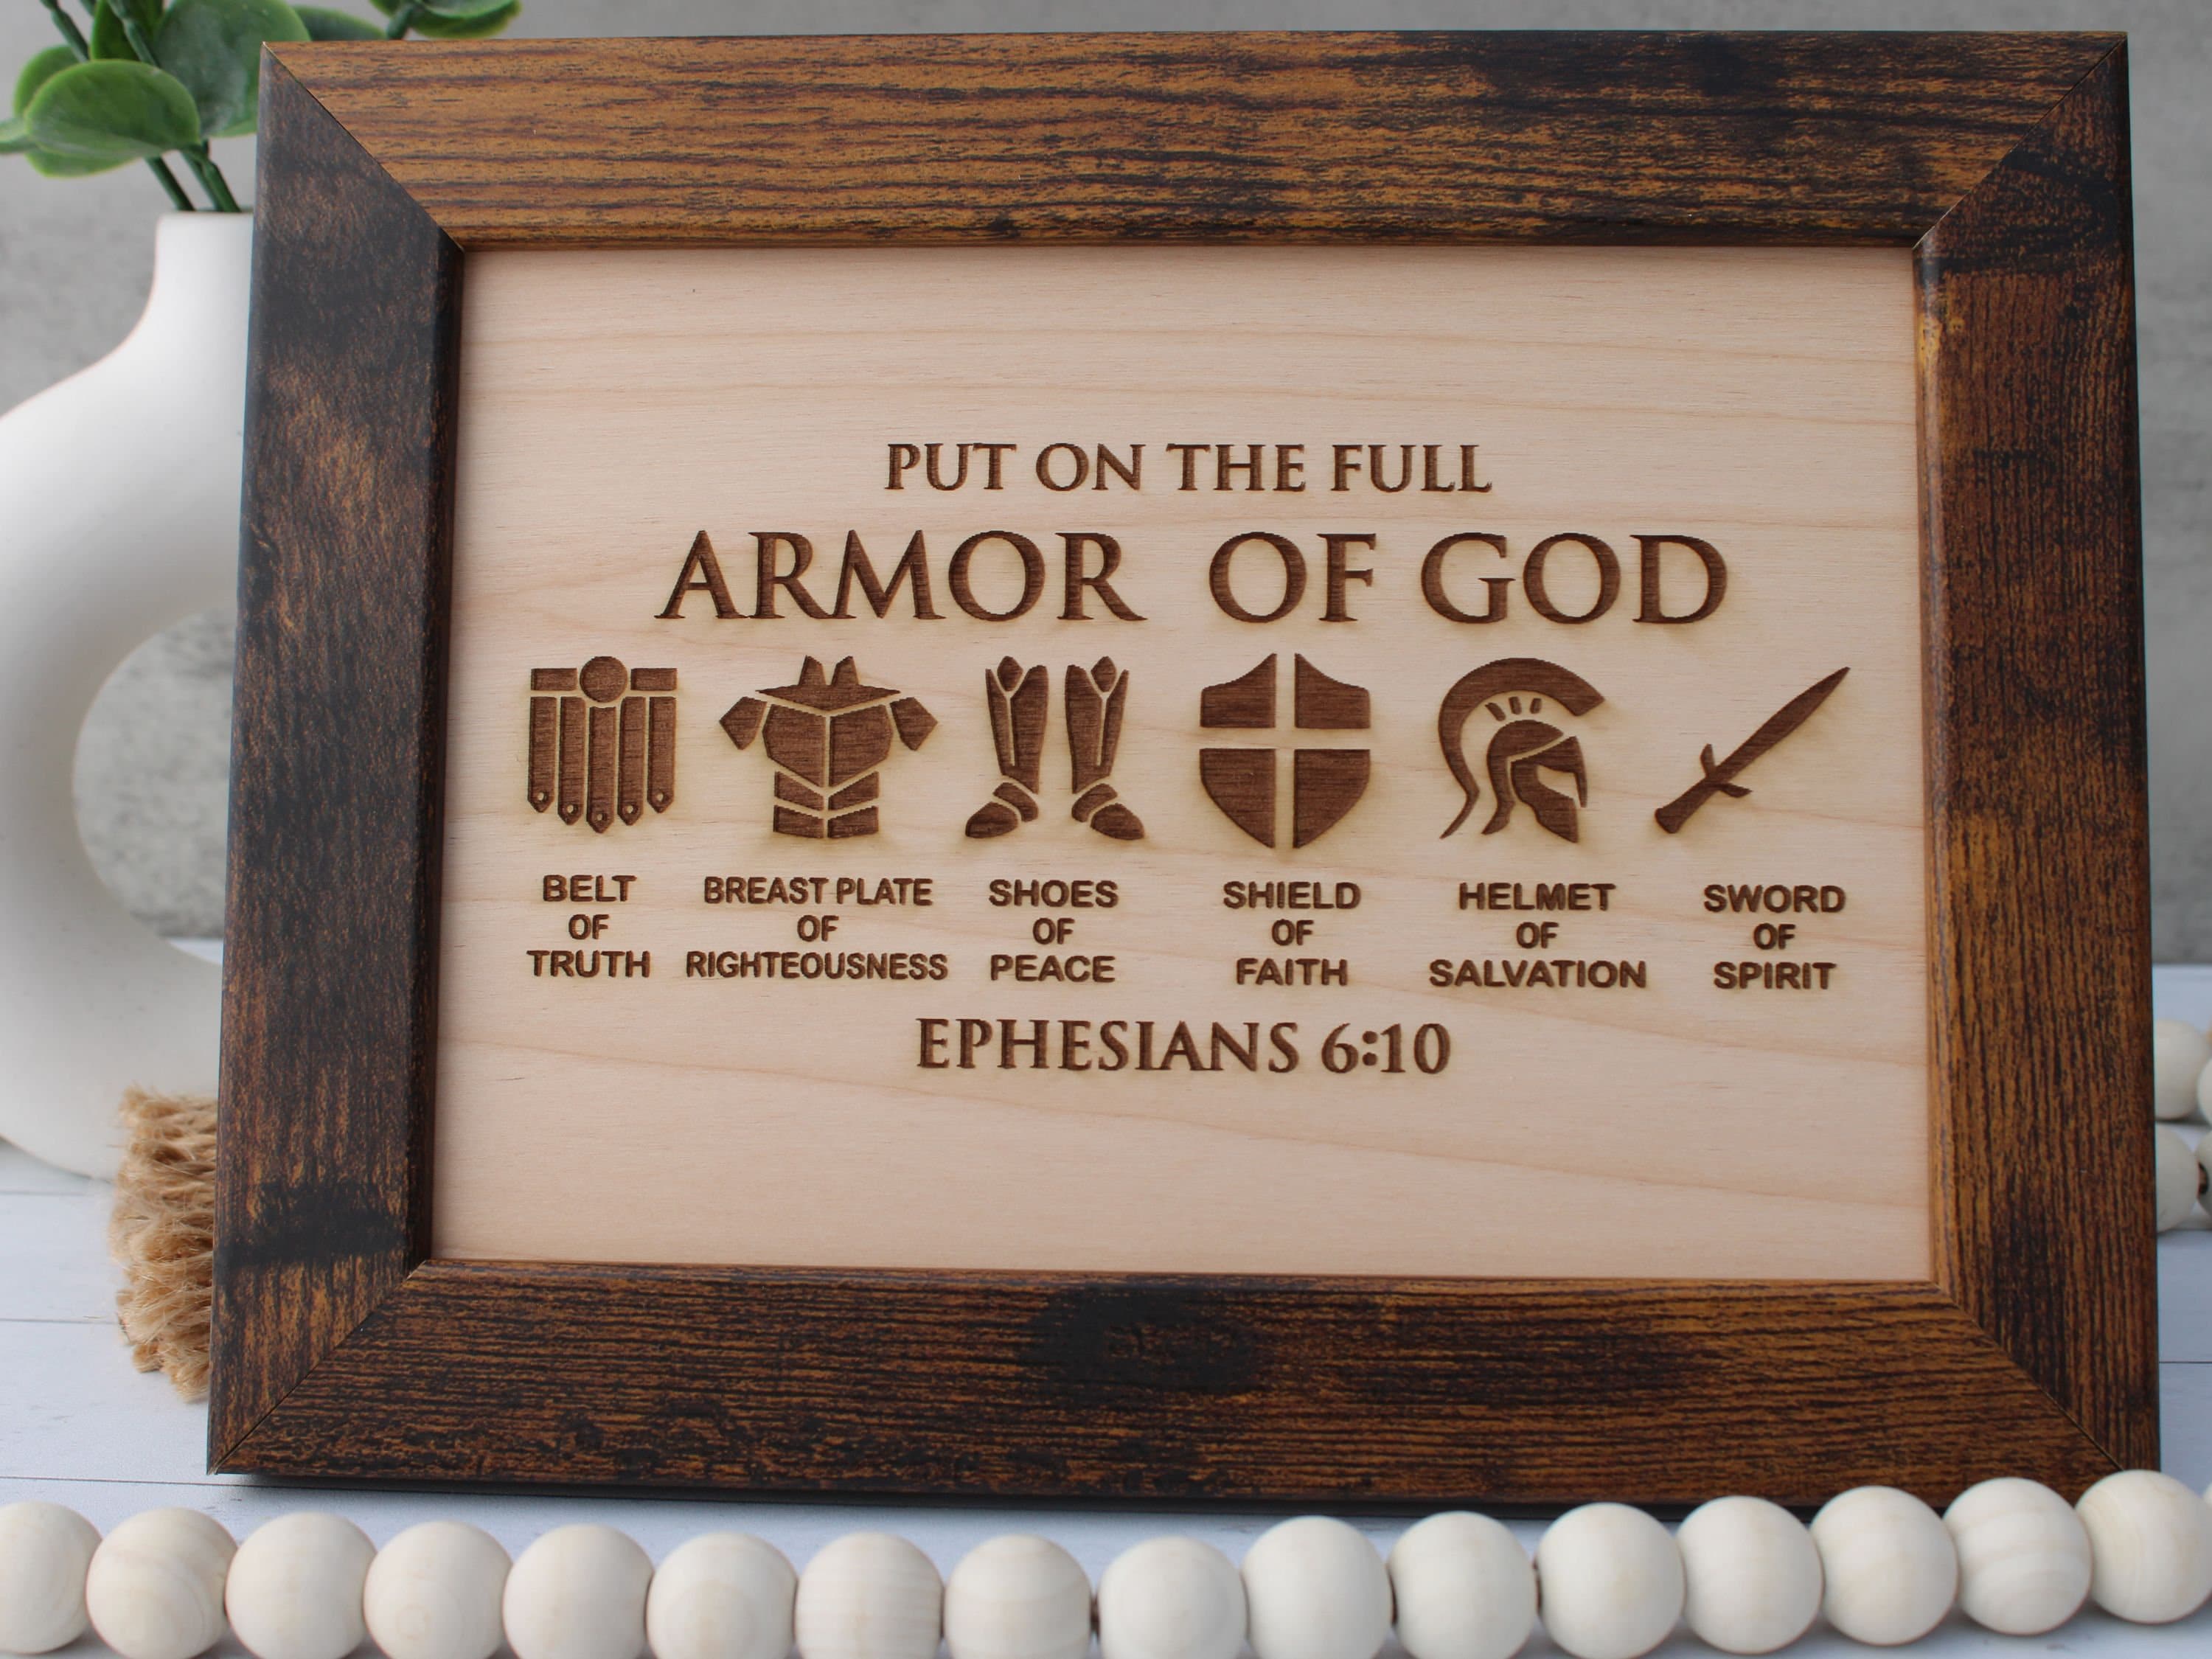 The Whole Armour of God - Male – Celestial Heritage Art